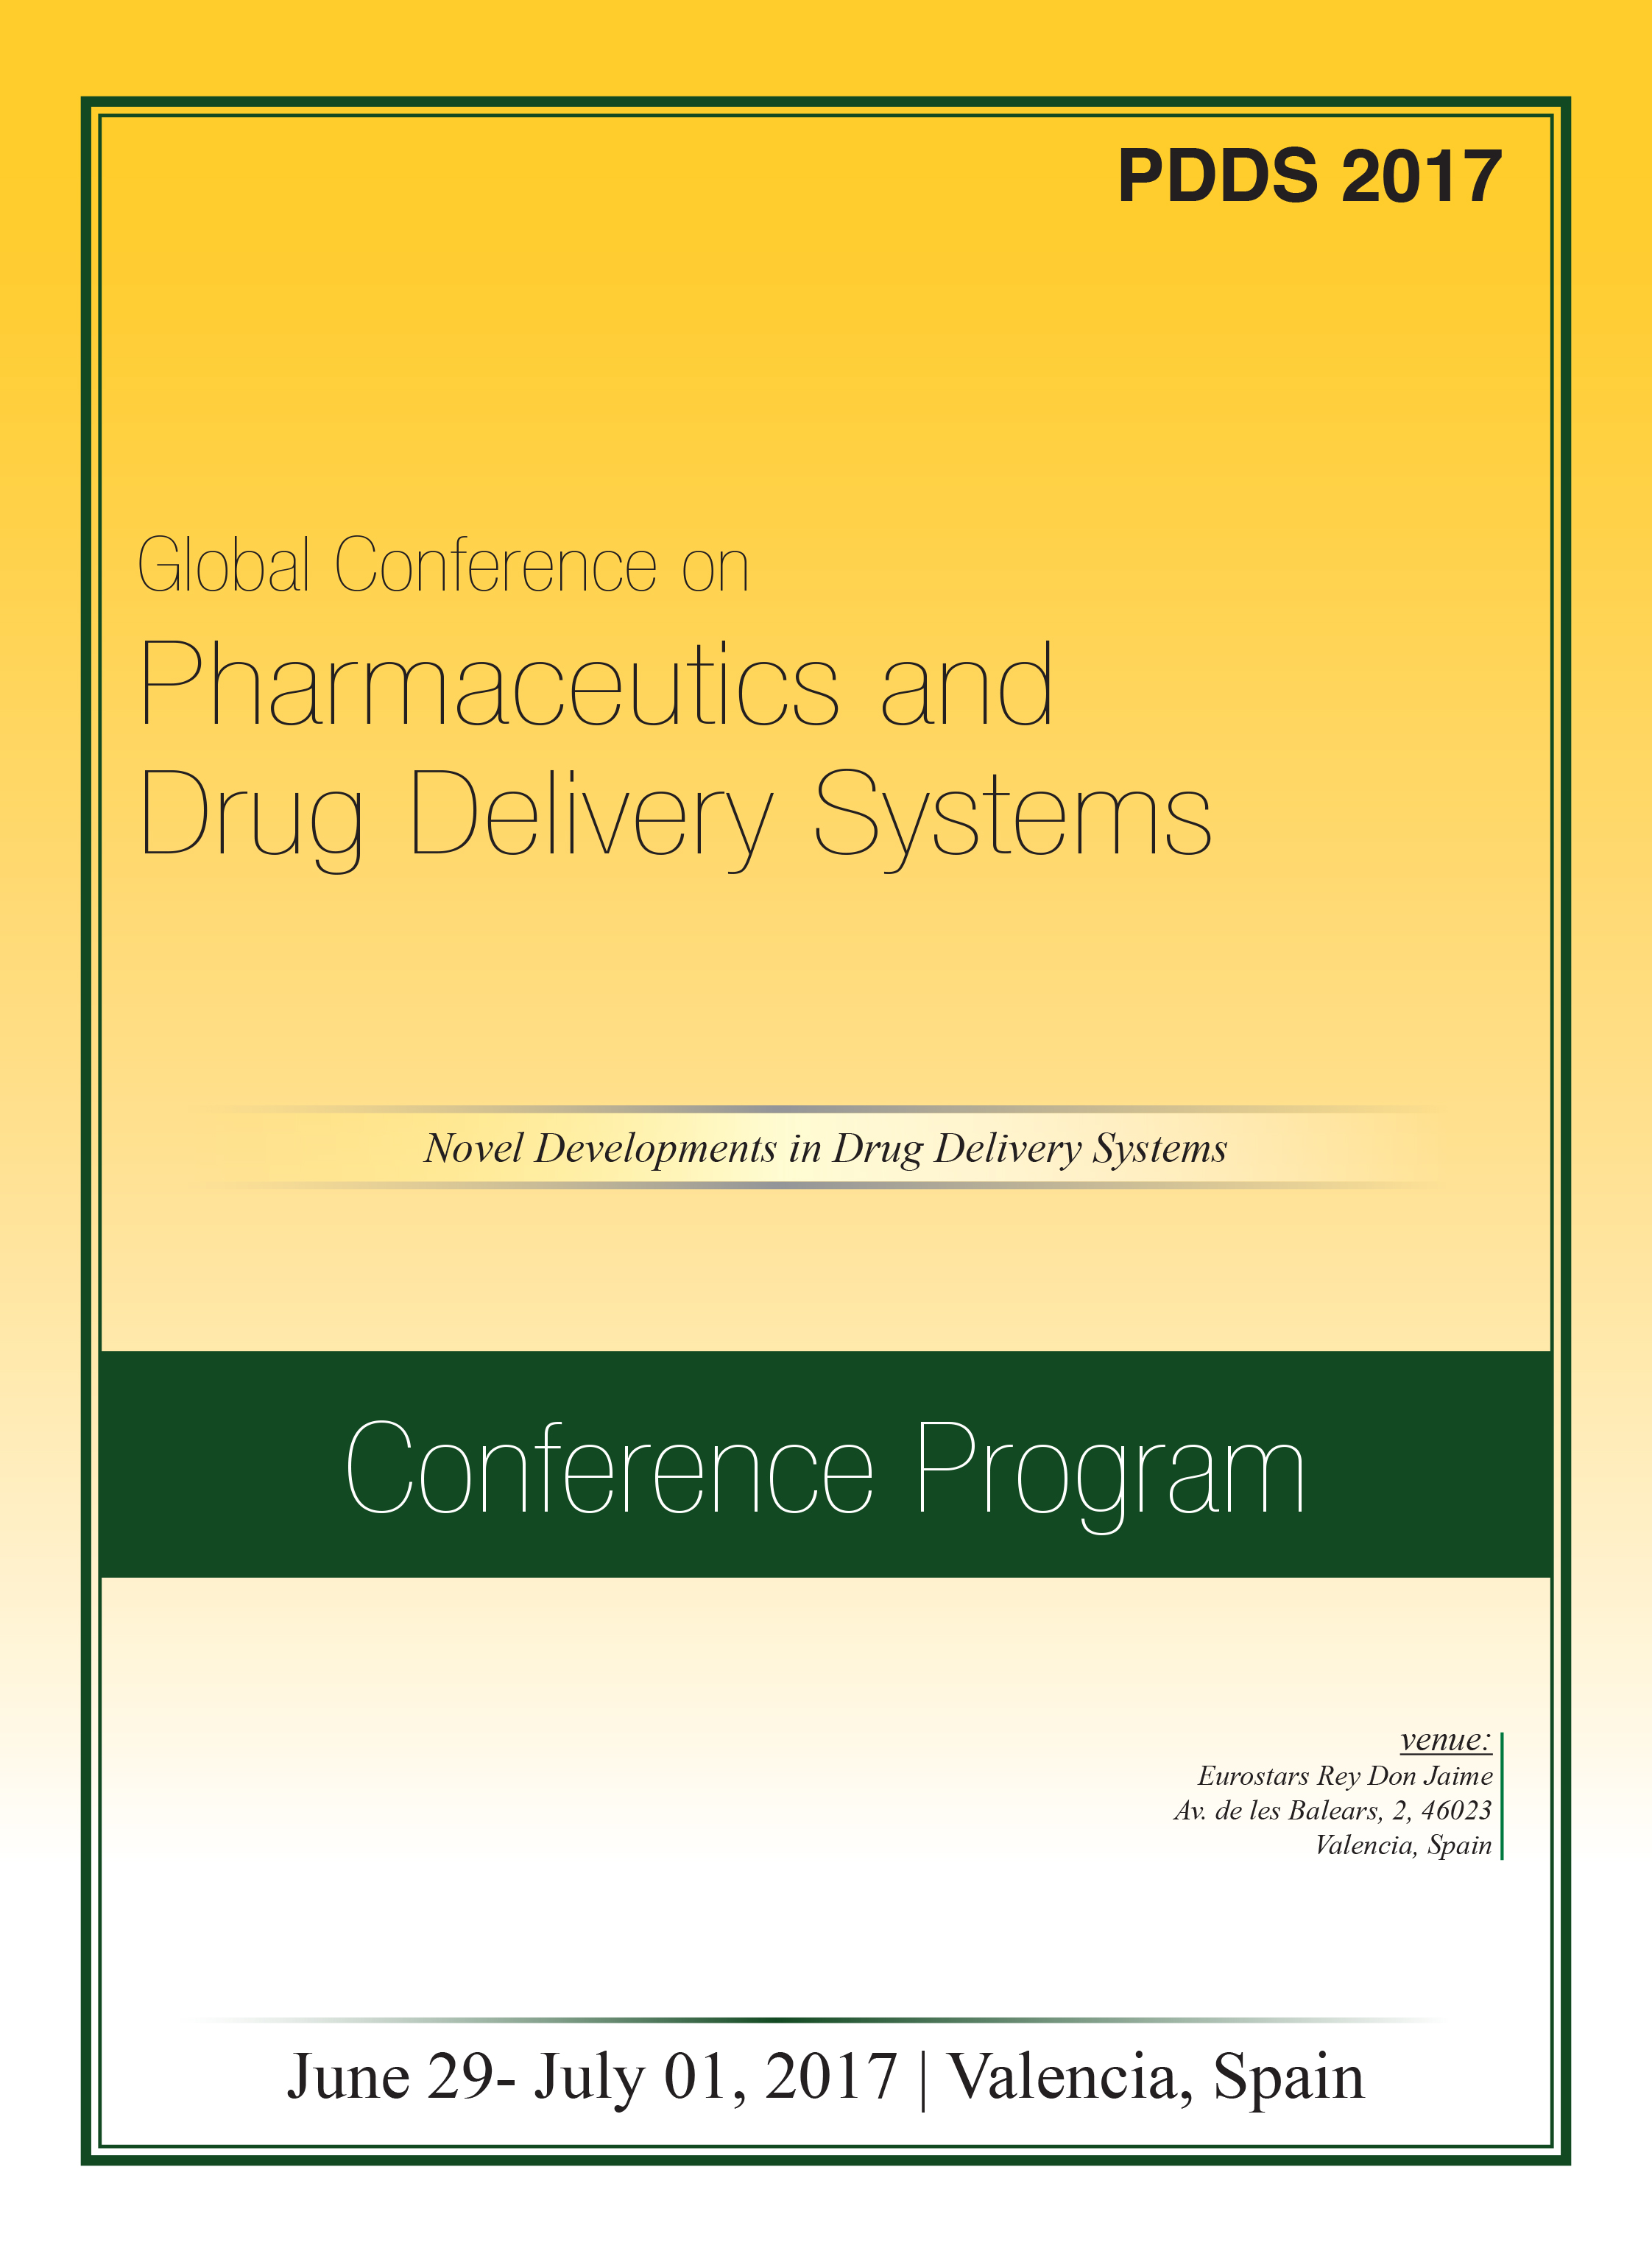 Global Conference on Pharmaceutics and Drug Delivery Systems Program